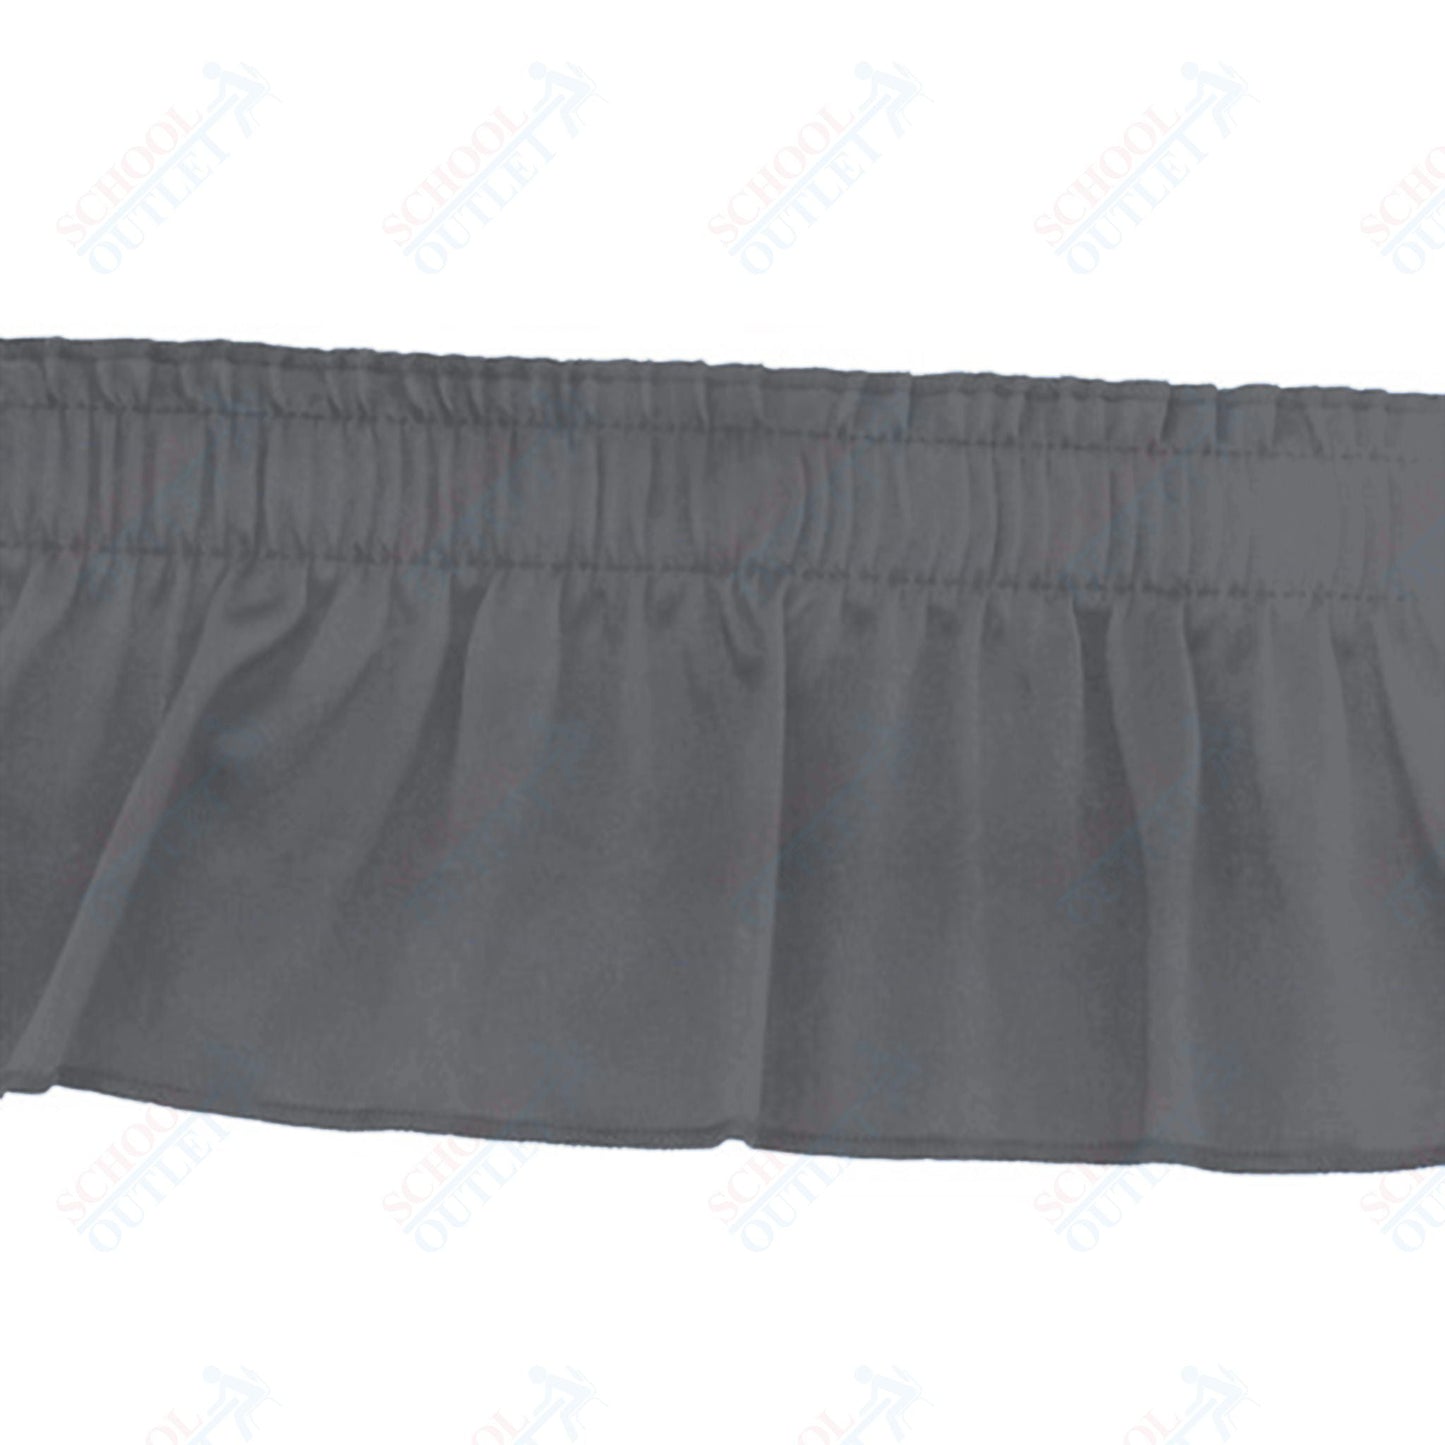 AmTab Stage and Riser Skirting - Shirred Pleat - 7" Skirting Height - Applicable for 8" Stage Height (AmTab AMT - SKRT8) - SchoolOutlet